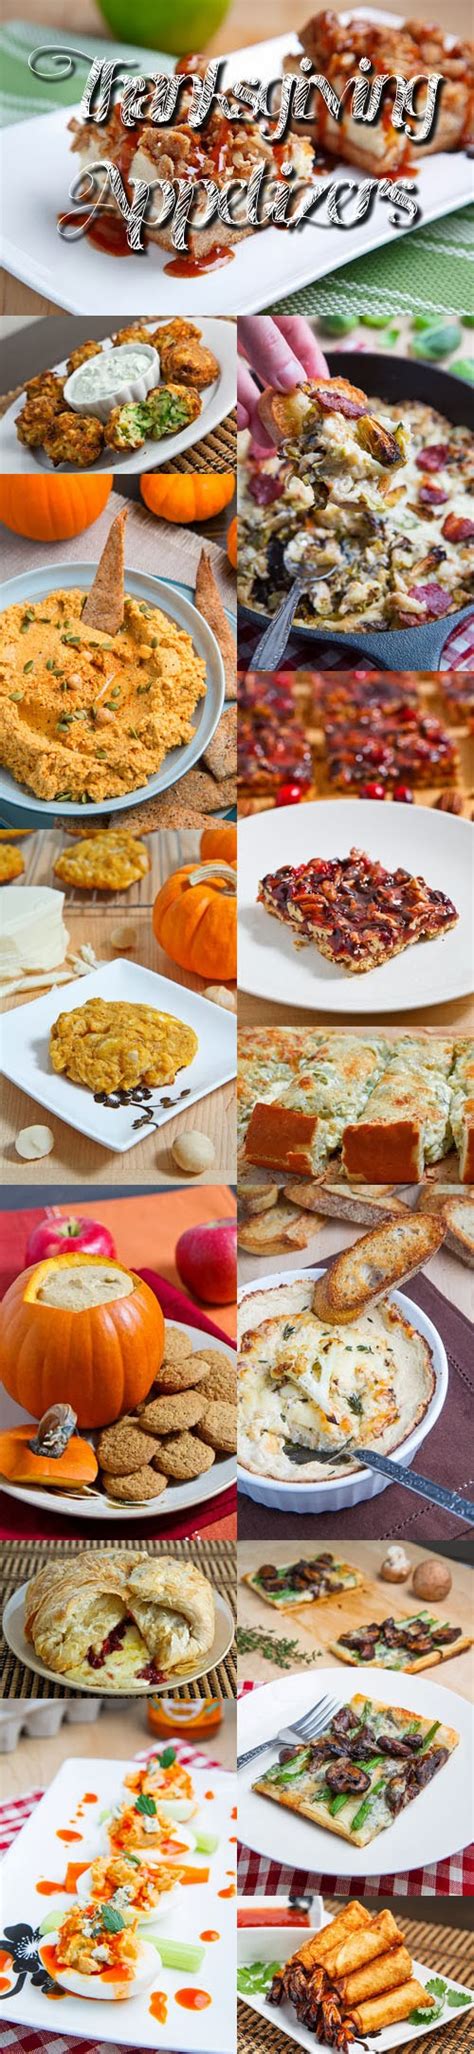 Best thanksgiving themed appetizers from cuisine thanksgiving inspired appetizers. Thanksgiving Appetizer Recipes on Closet Cooking